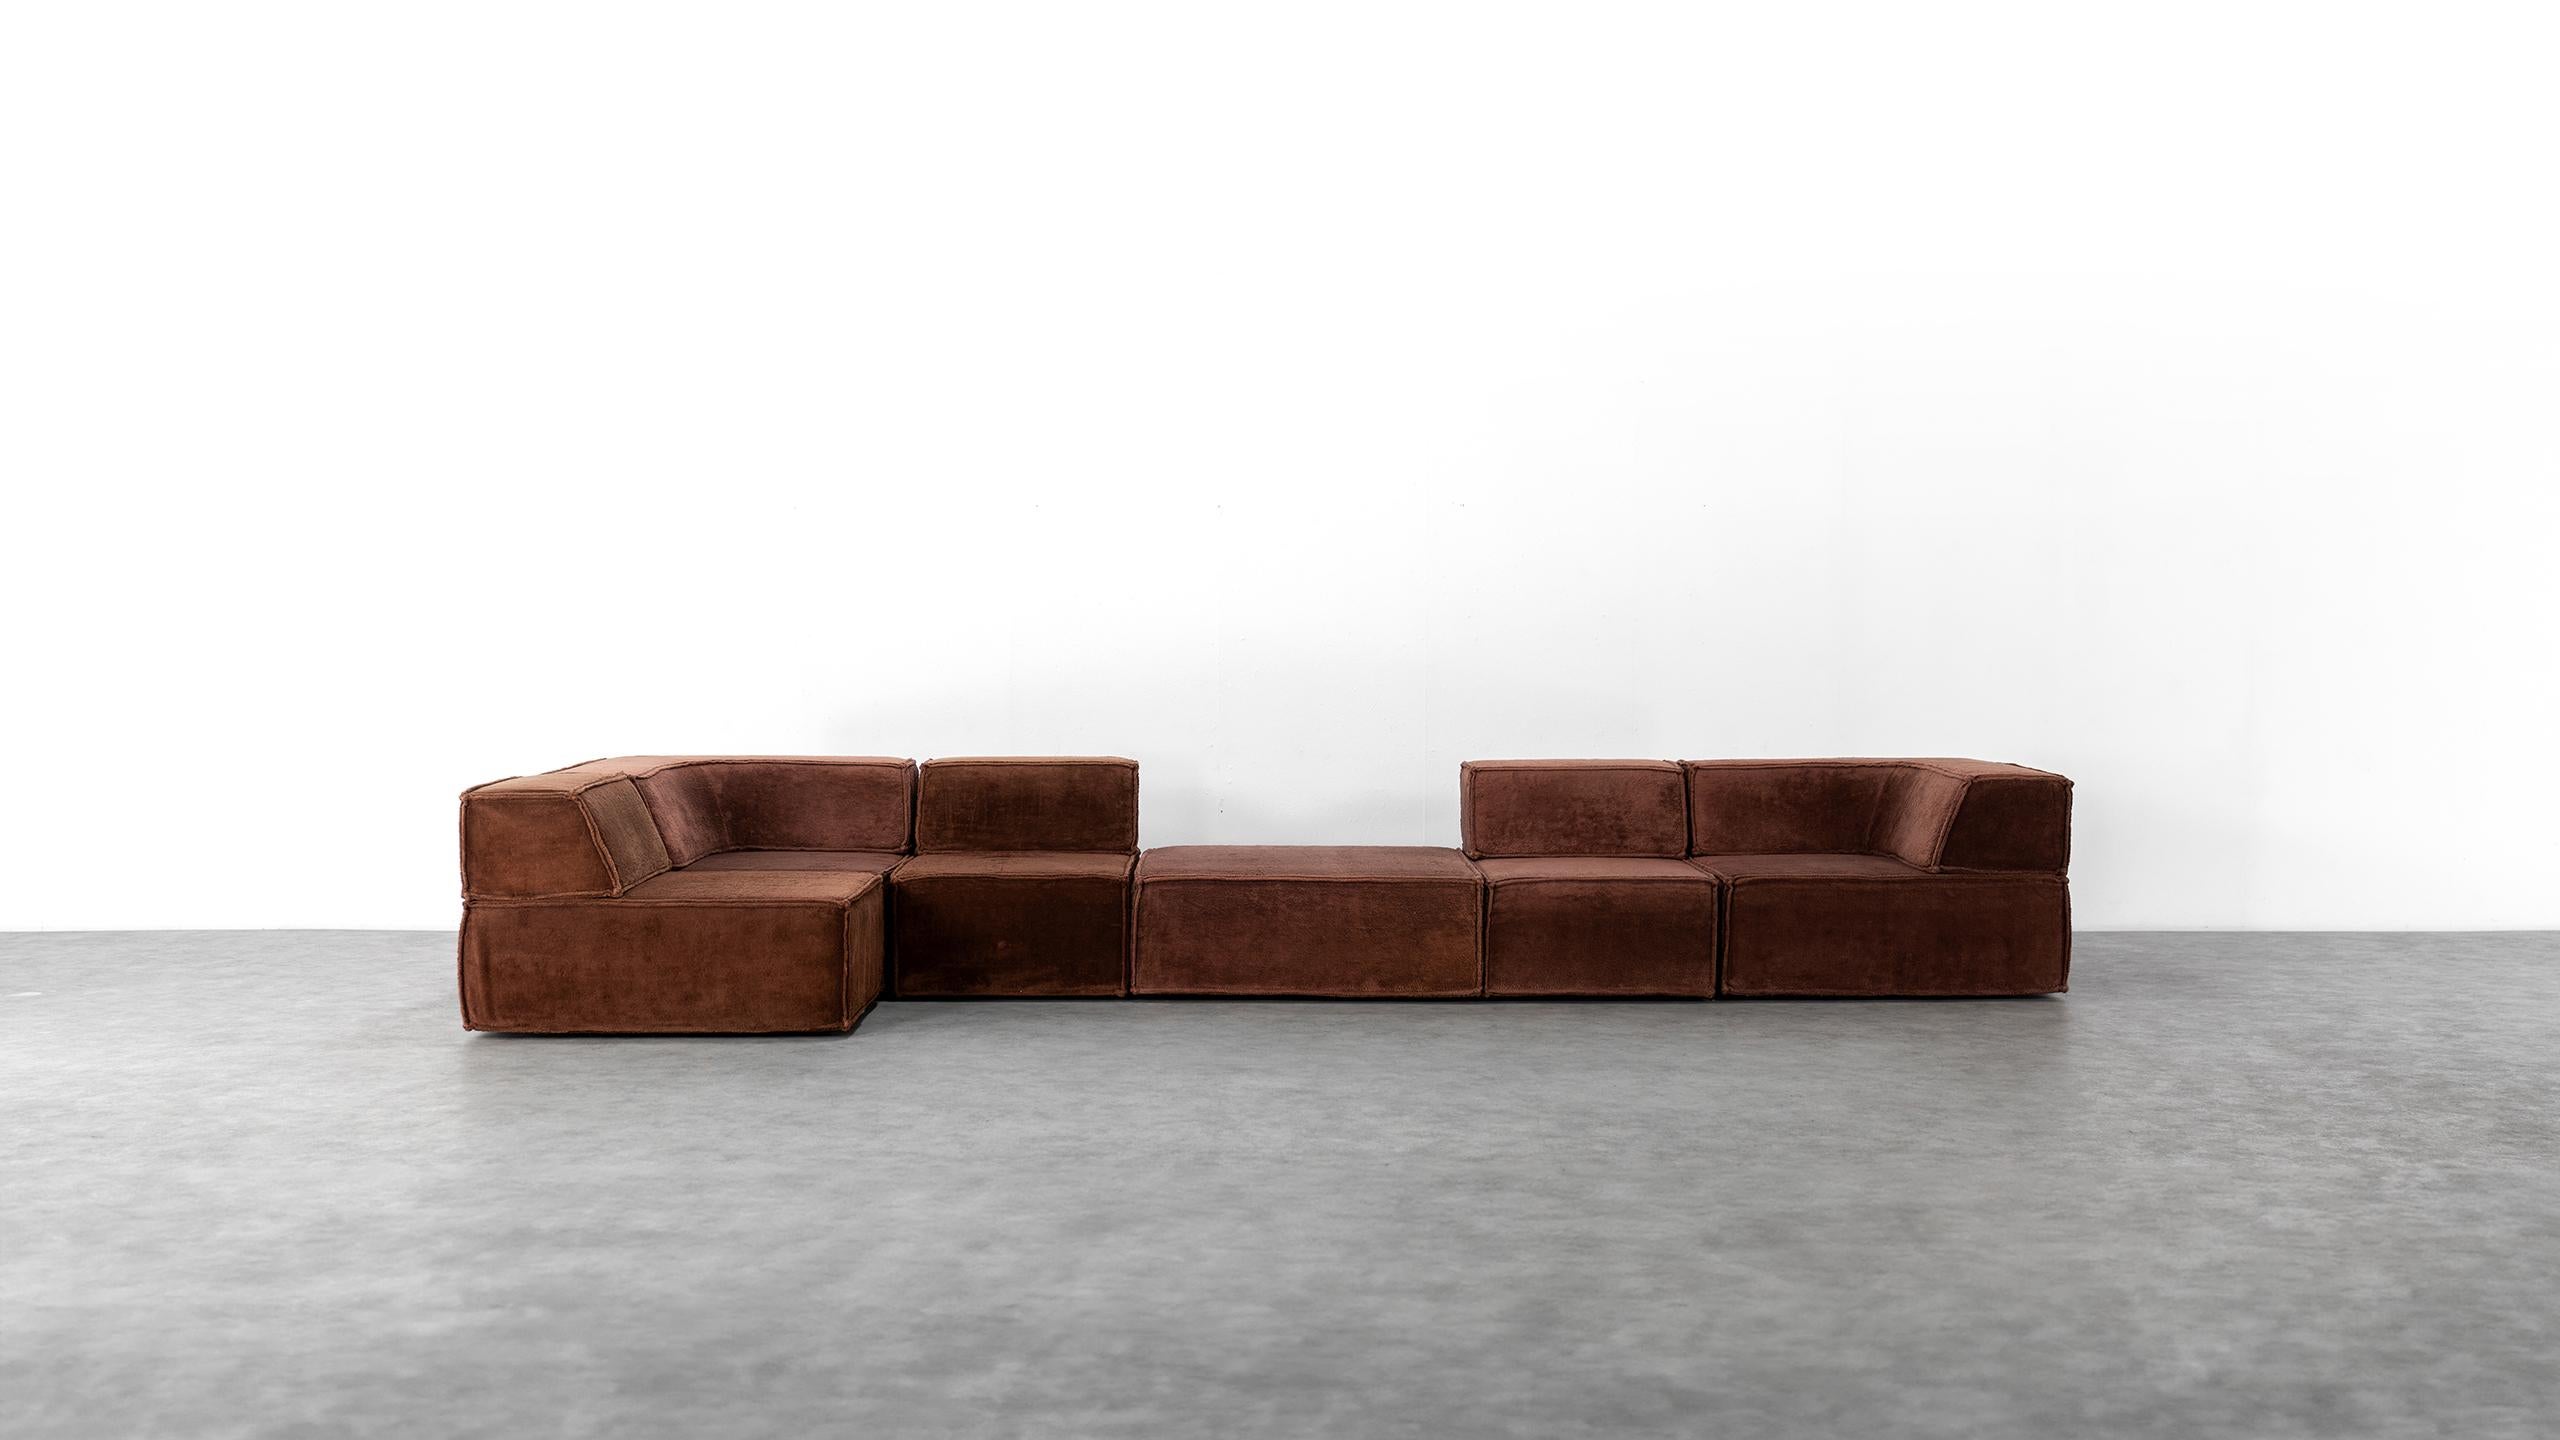 German Cor Trio Modular Sofa Giant Landscape Brown Chocolate 1972 by Team Form AG For Sale